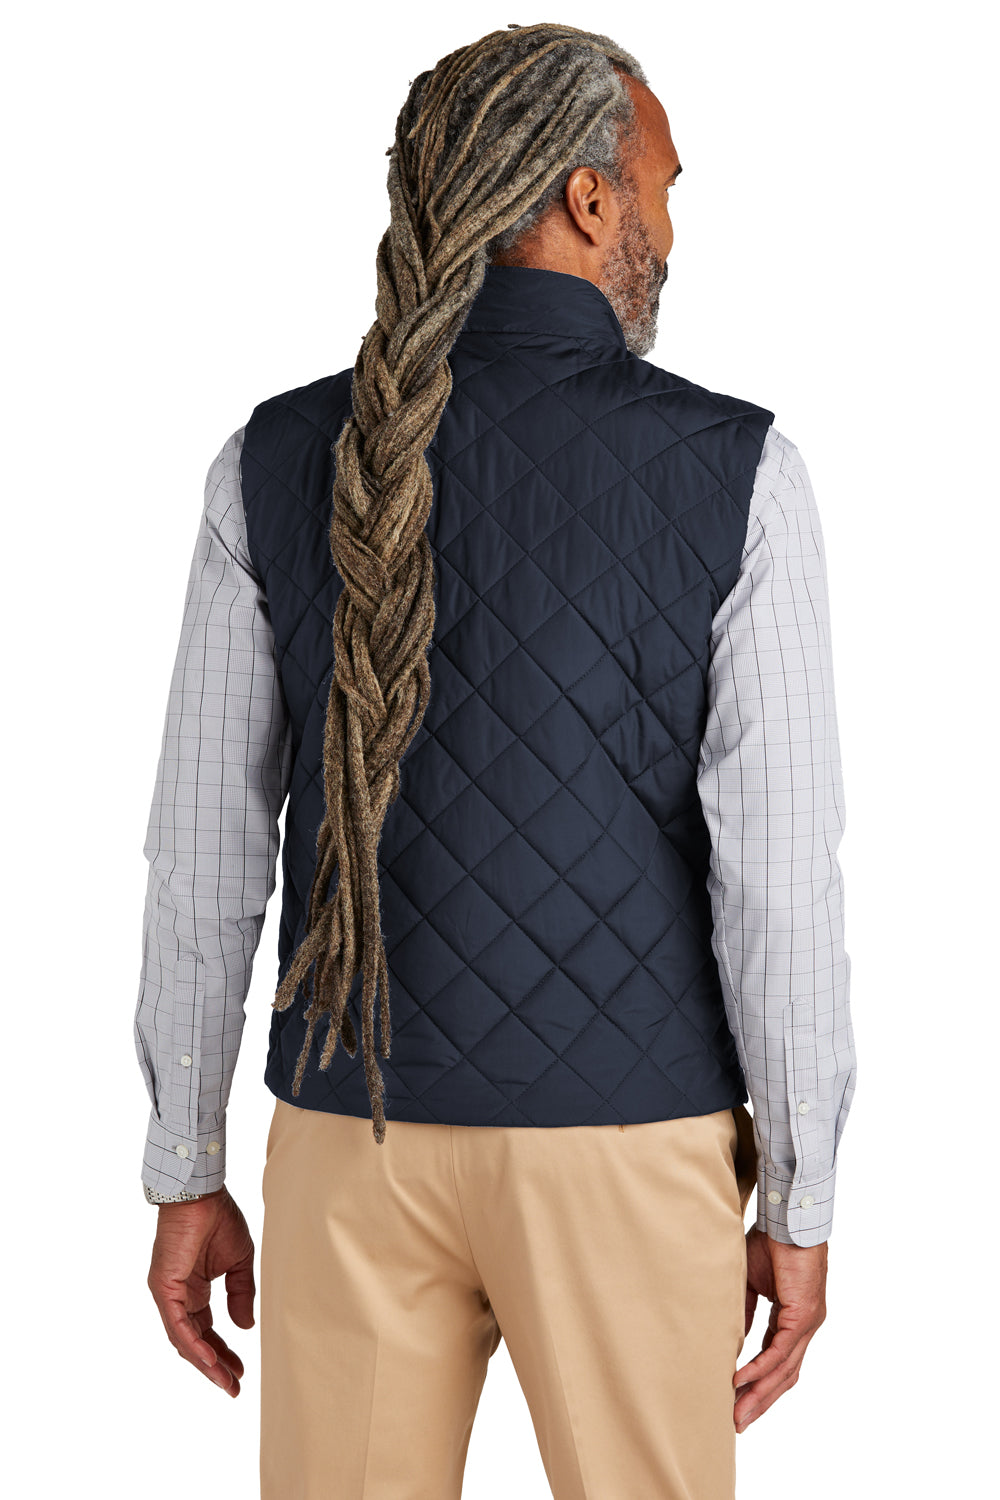 Brooks Brothers Mens Water Resistant Quilted Full Zip Vest Night Navy Blue Model Back